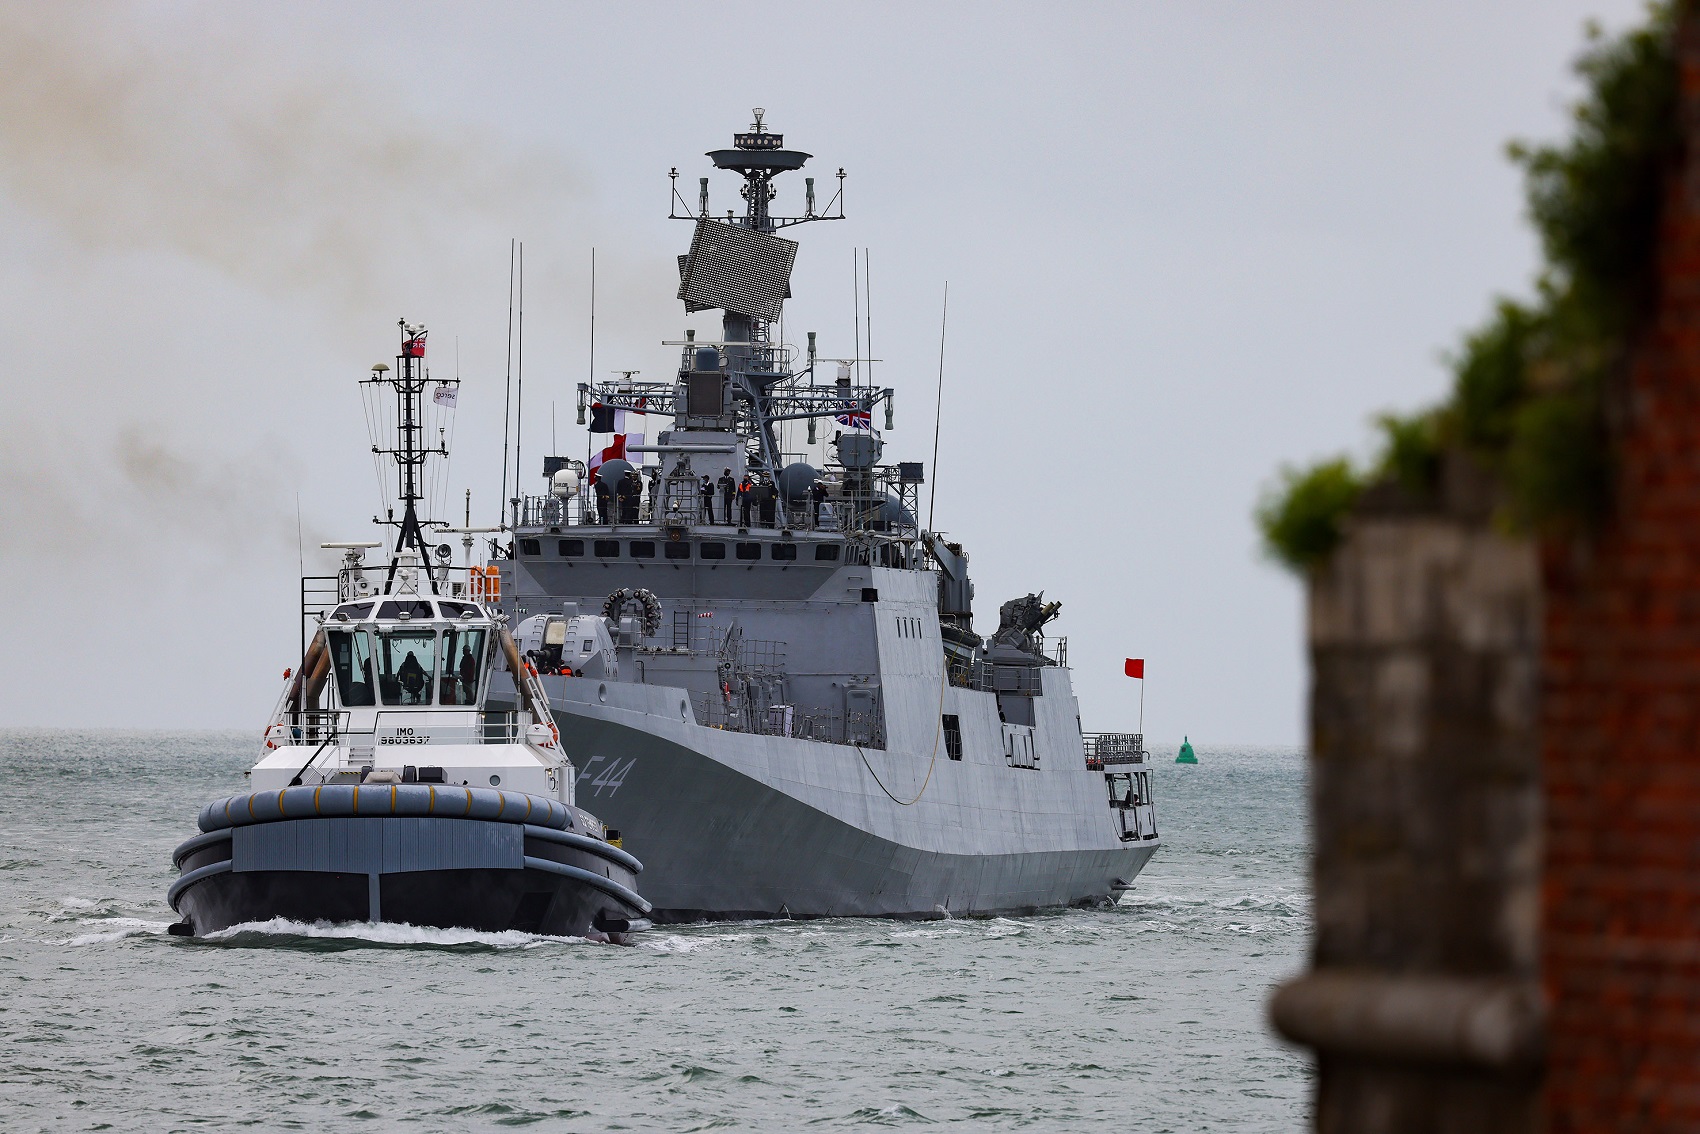 Indian Navy Frigate INS Tabar Visits Portsmouth Ahead of Workout with Royal Navy